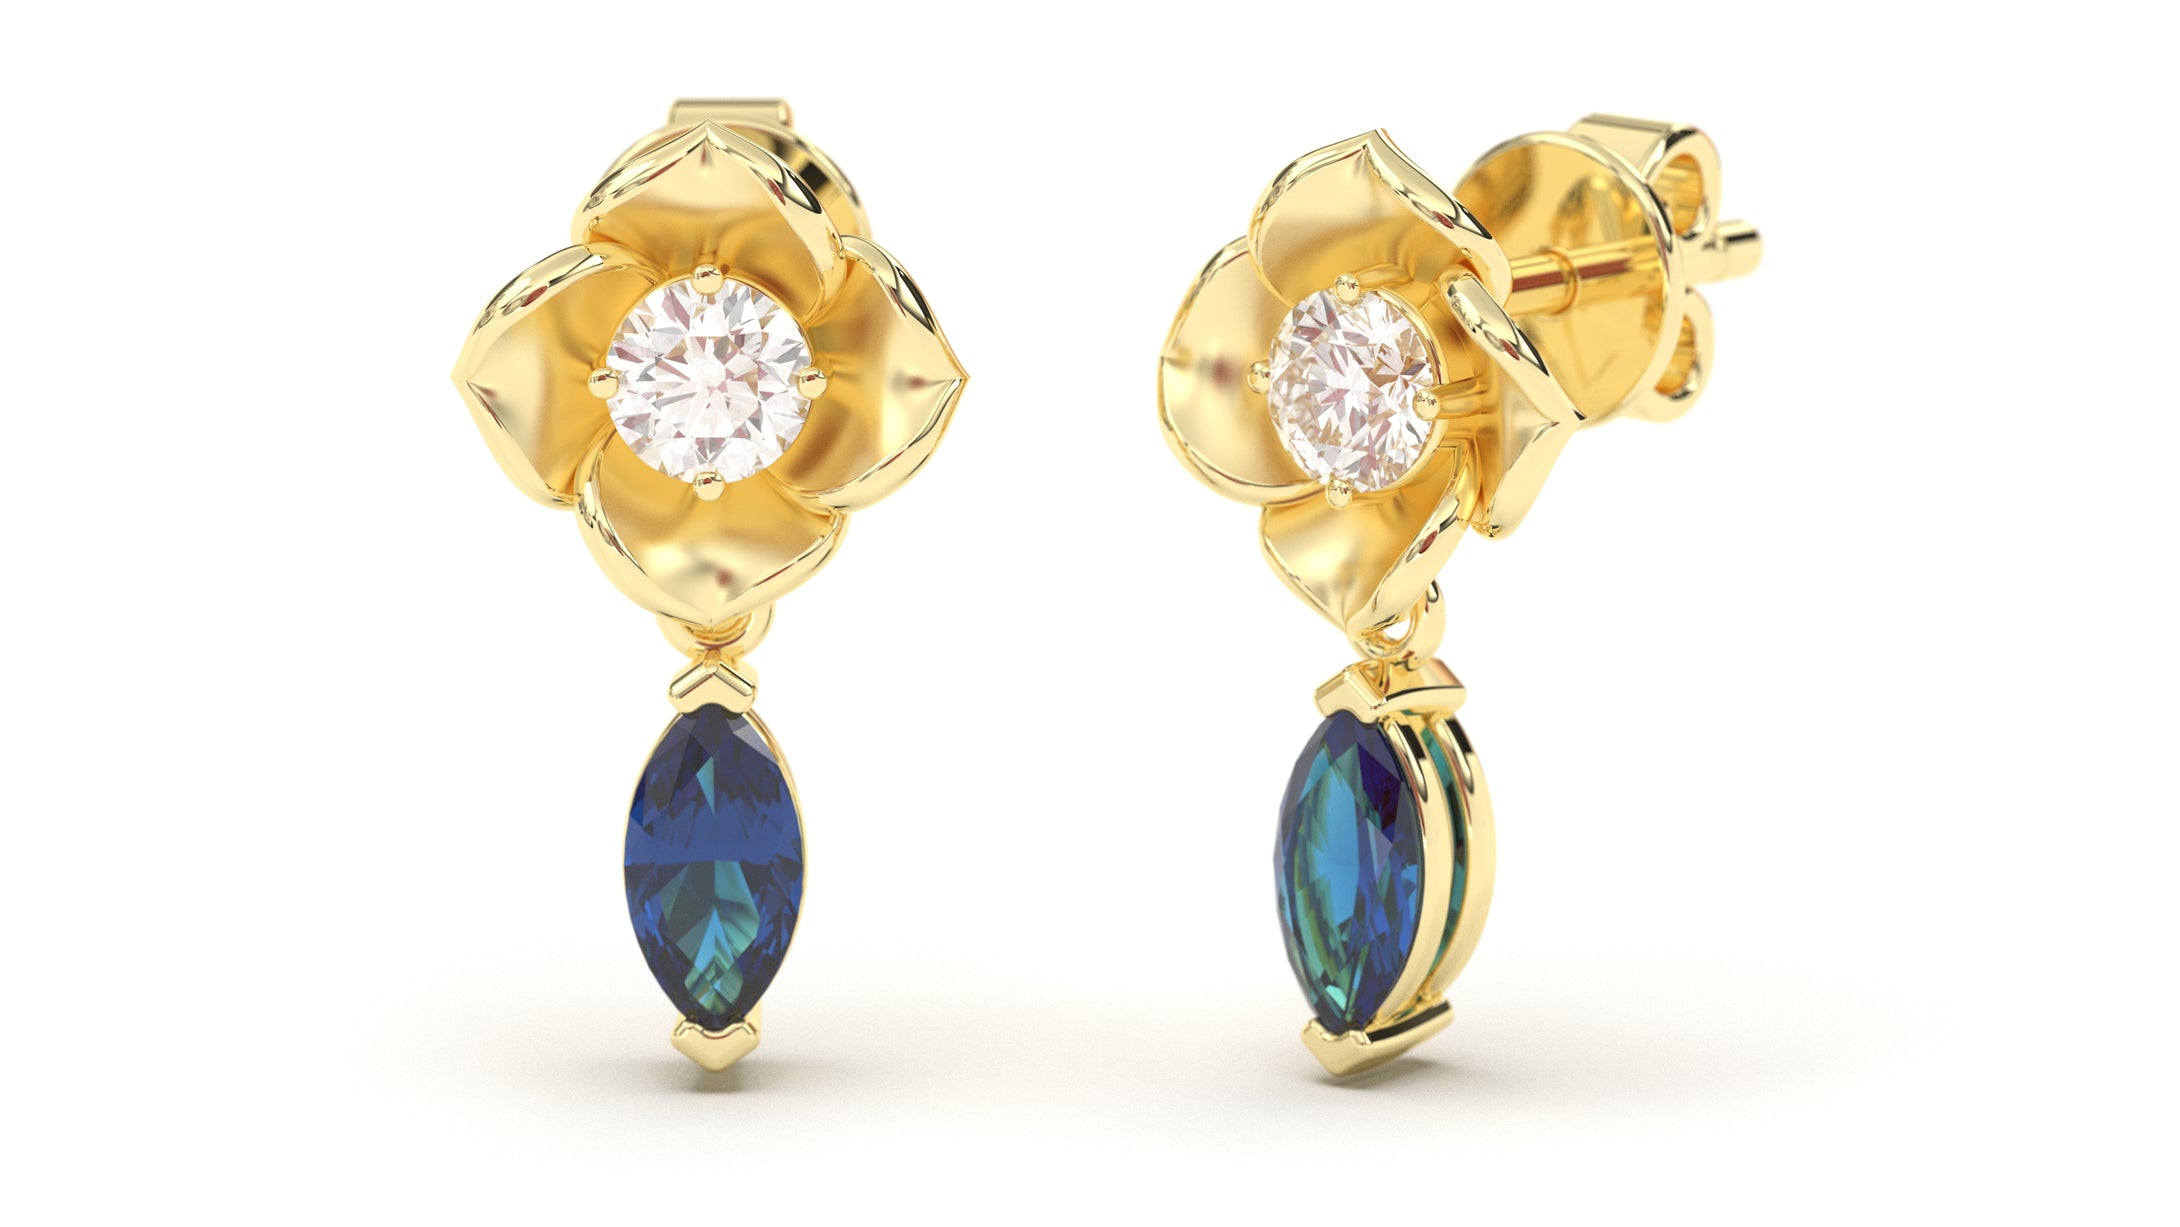 Earrings Flower Theme with Round White Diamonds and Marquise Blue Sapphires | Bloom Flora XIV